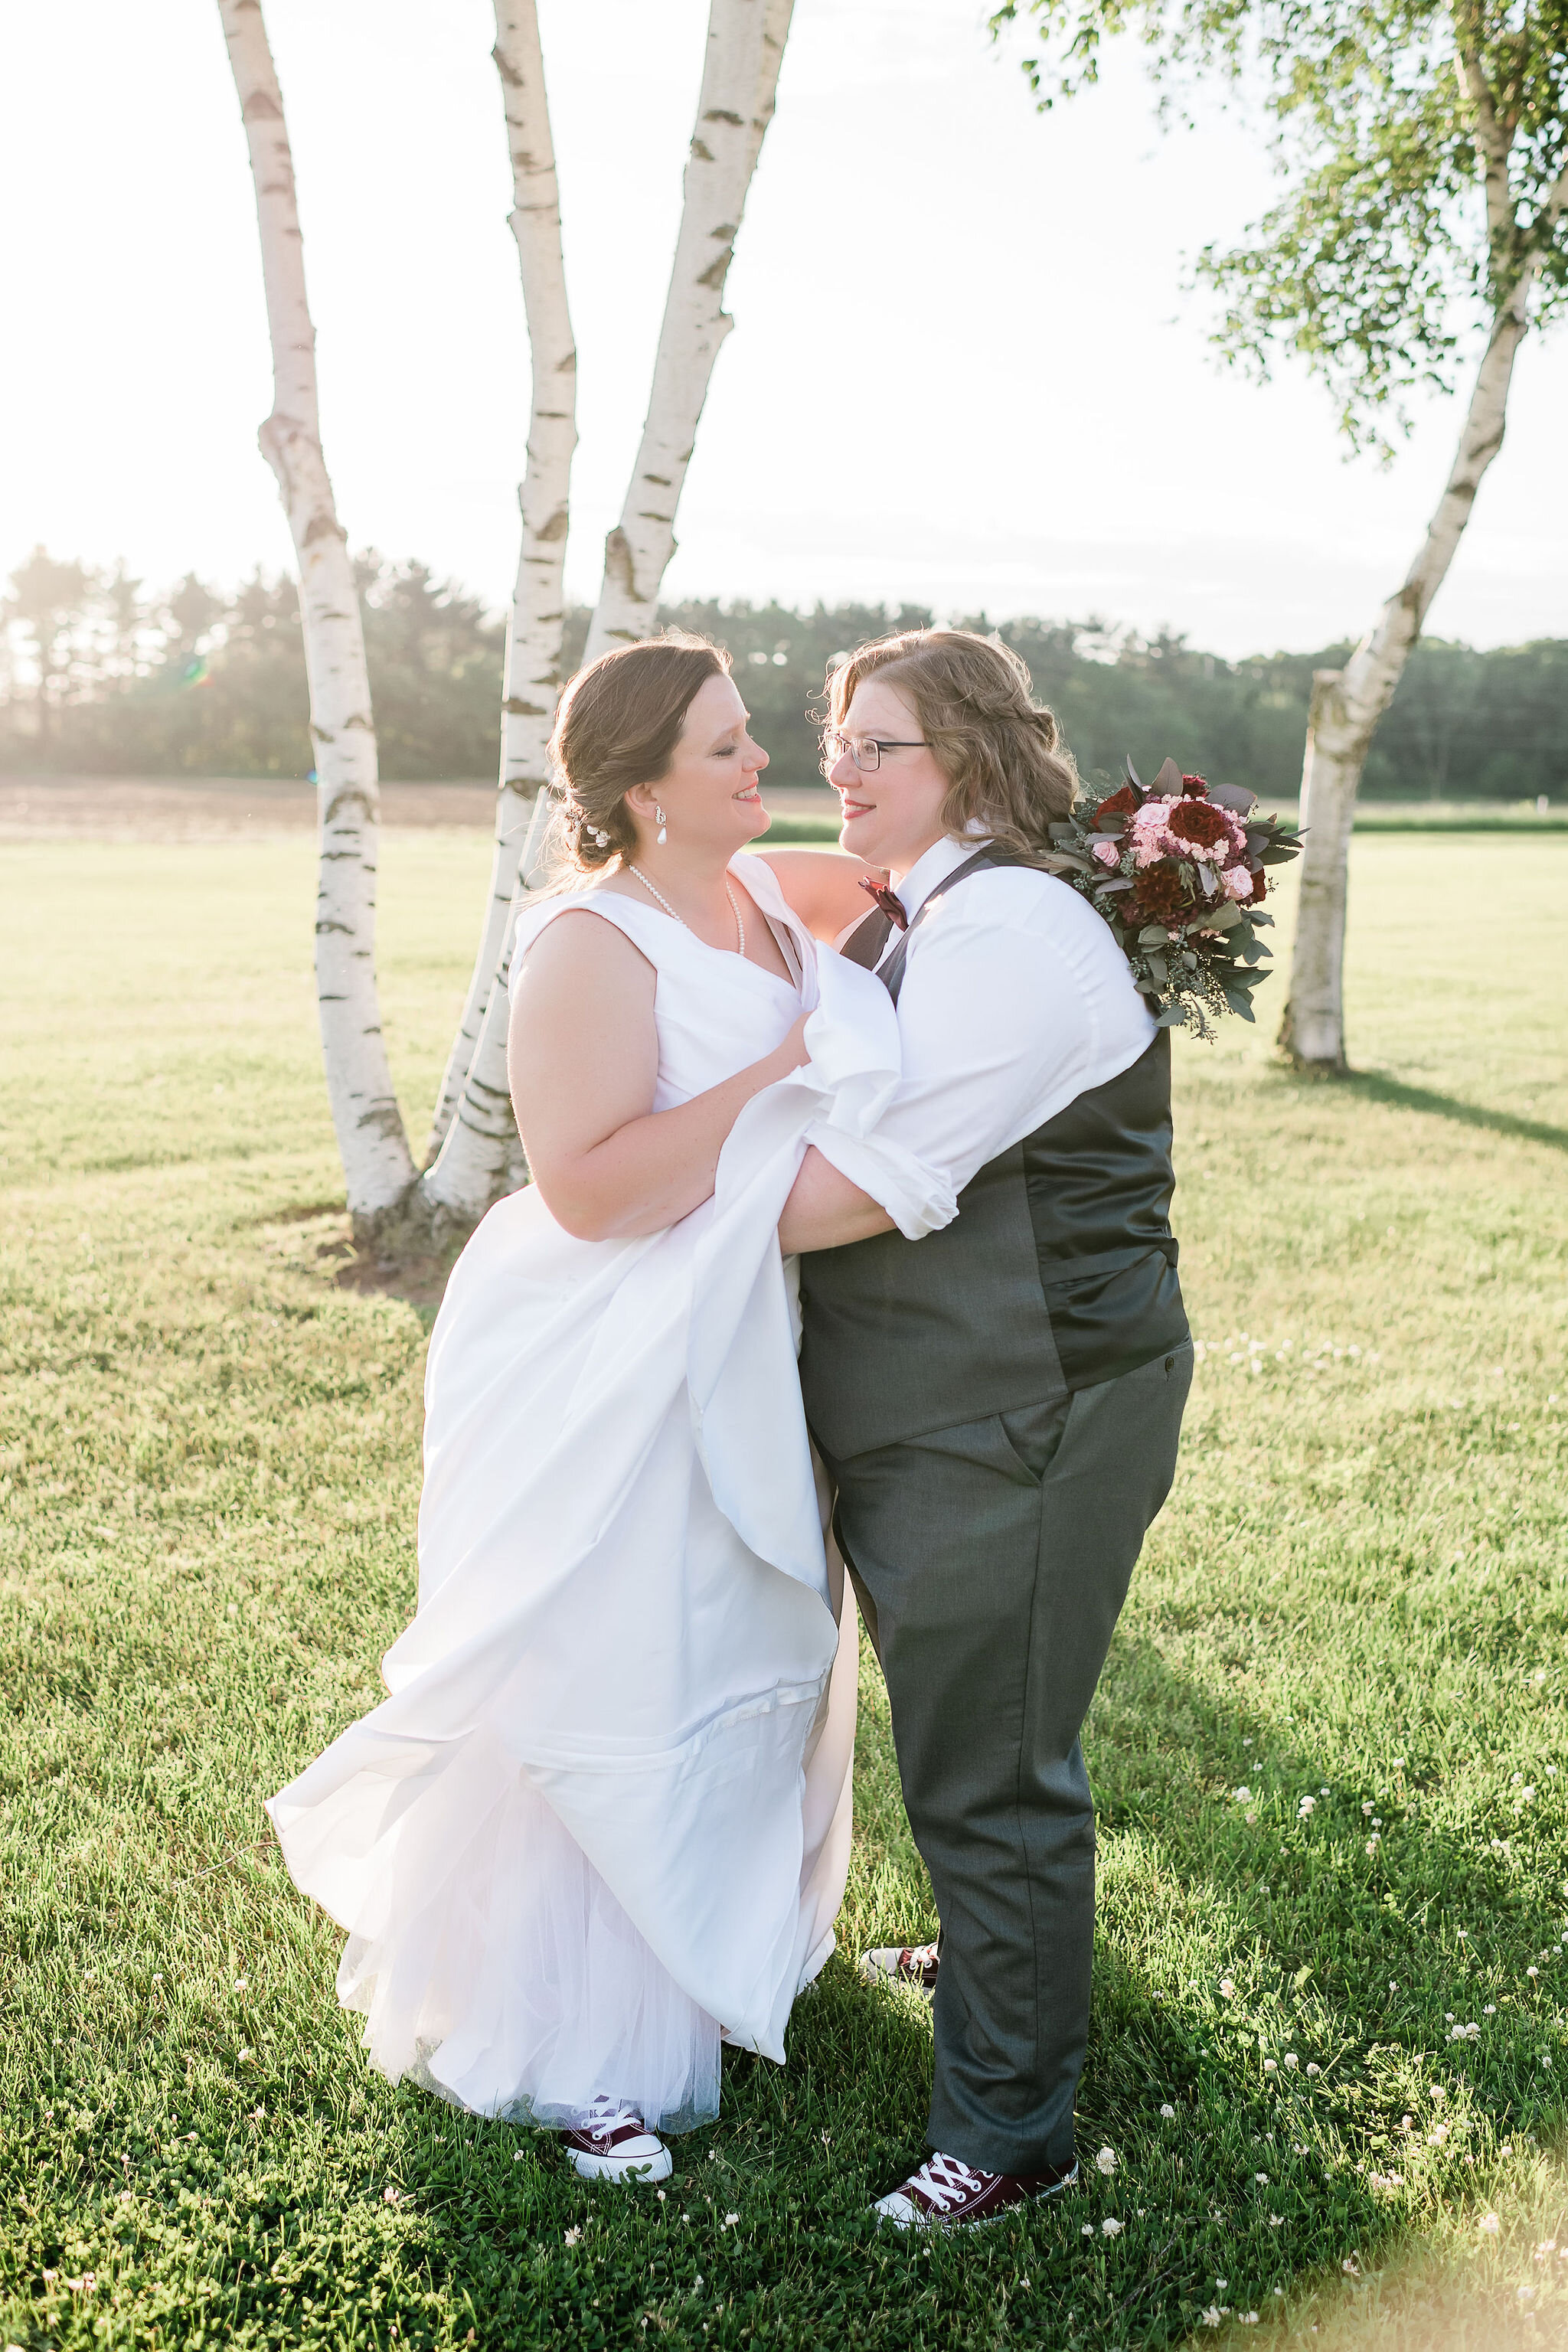 Brides dancing in front of birch trees